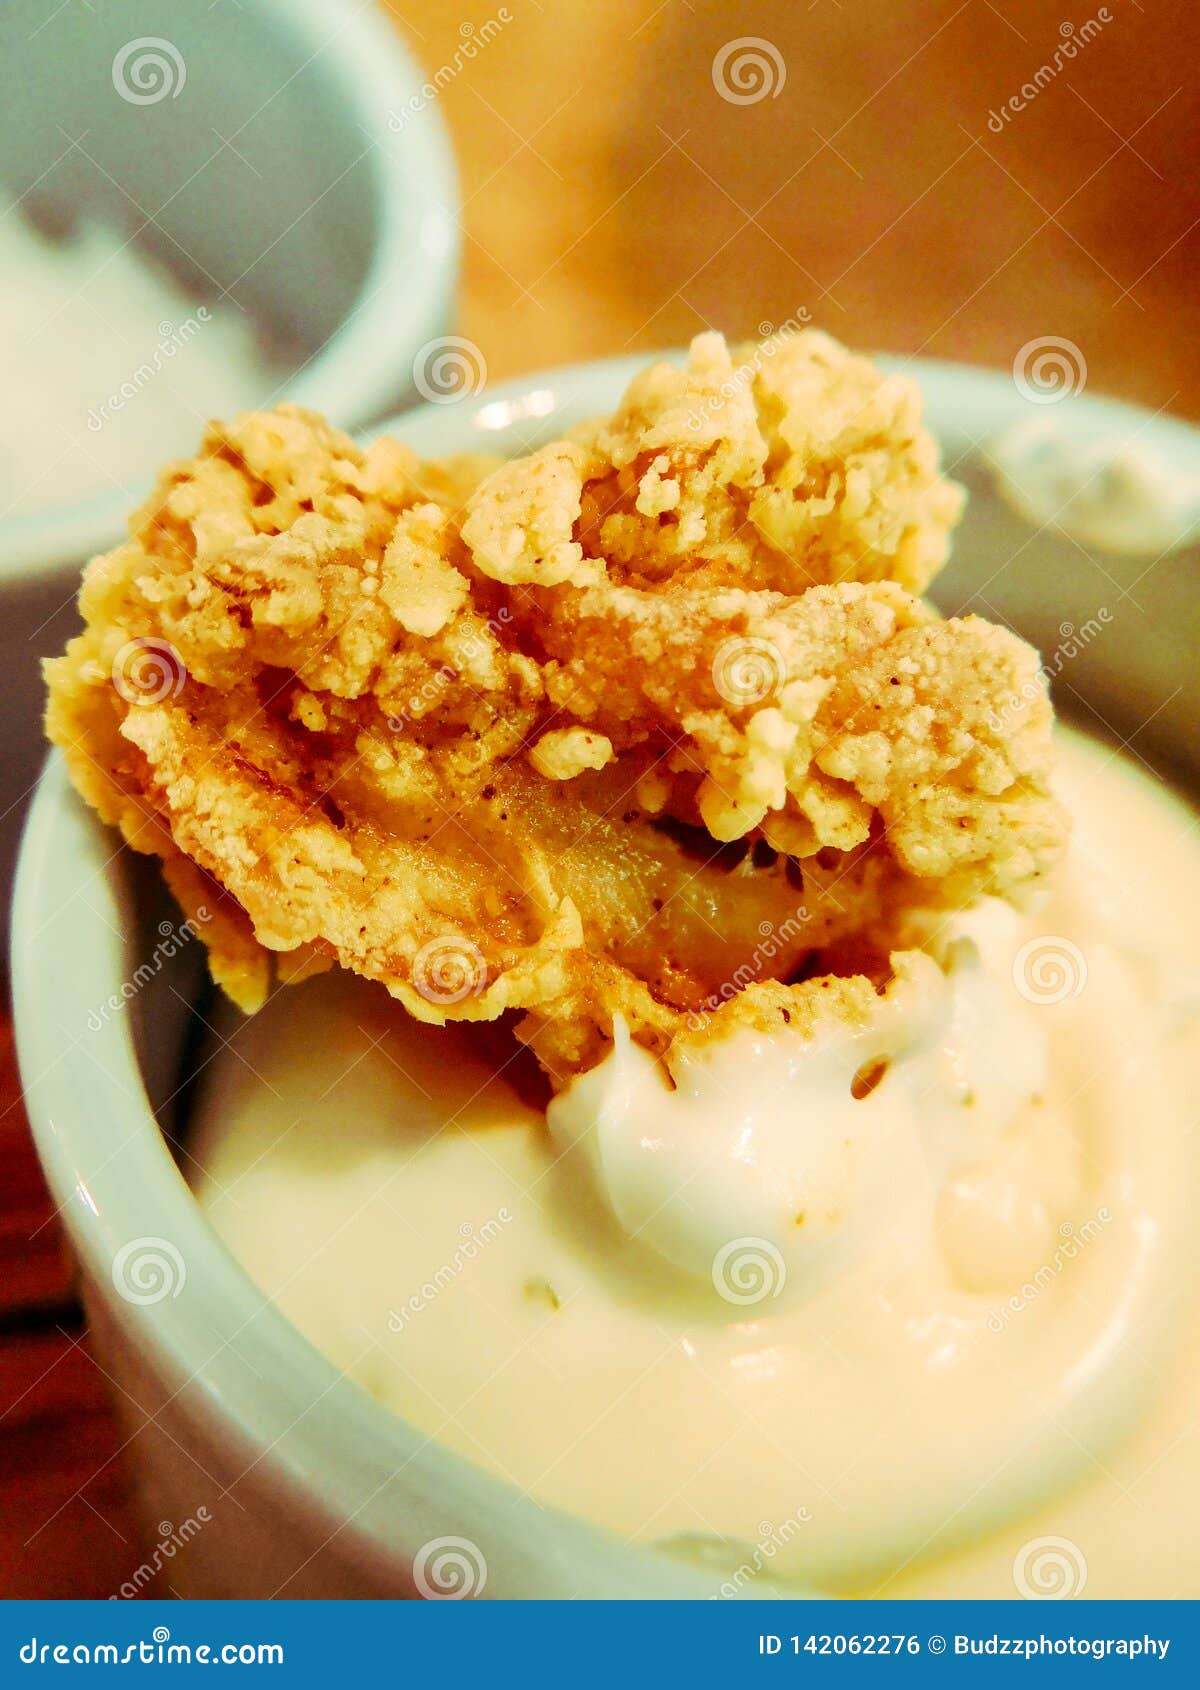 Popcorn Chicken With Tartar Sauce. A Traditional Recipe Of ...